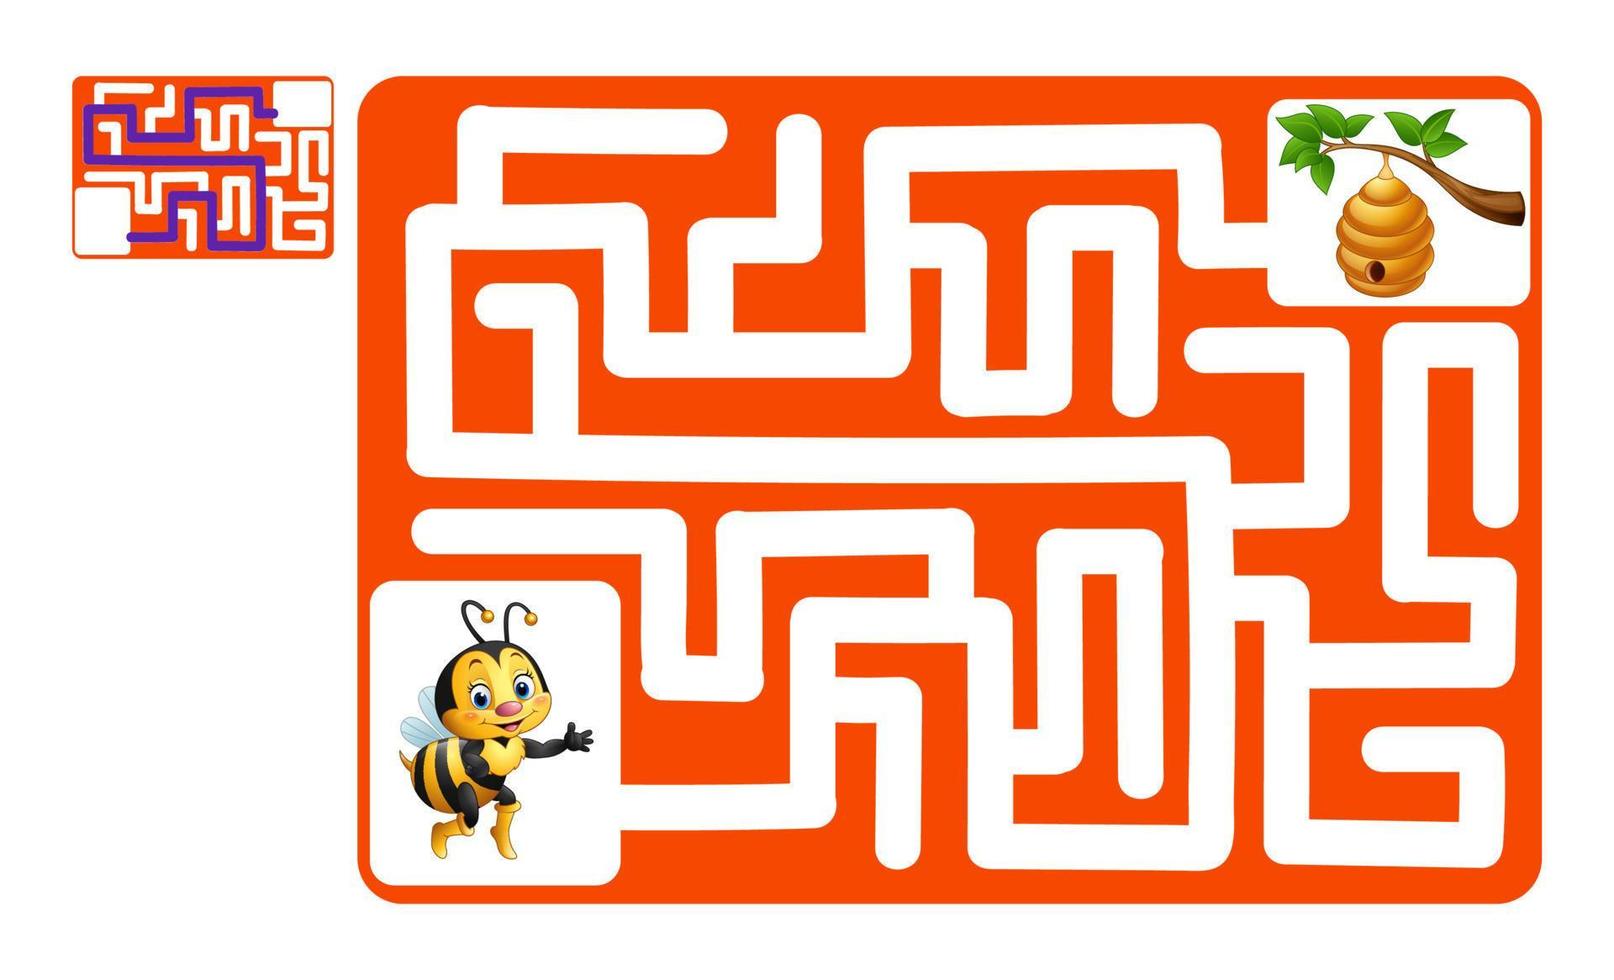 Help the bee to find hive vector